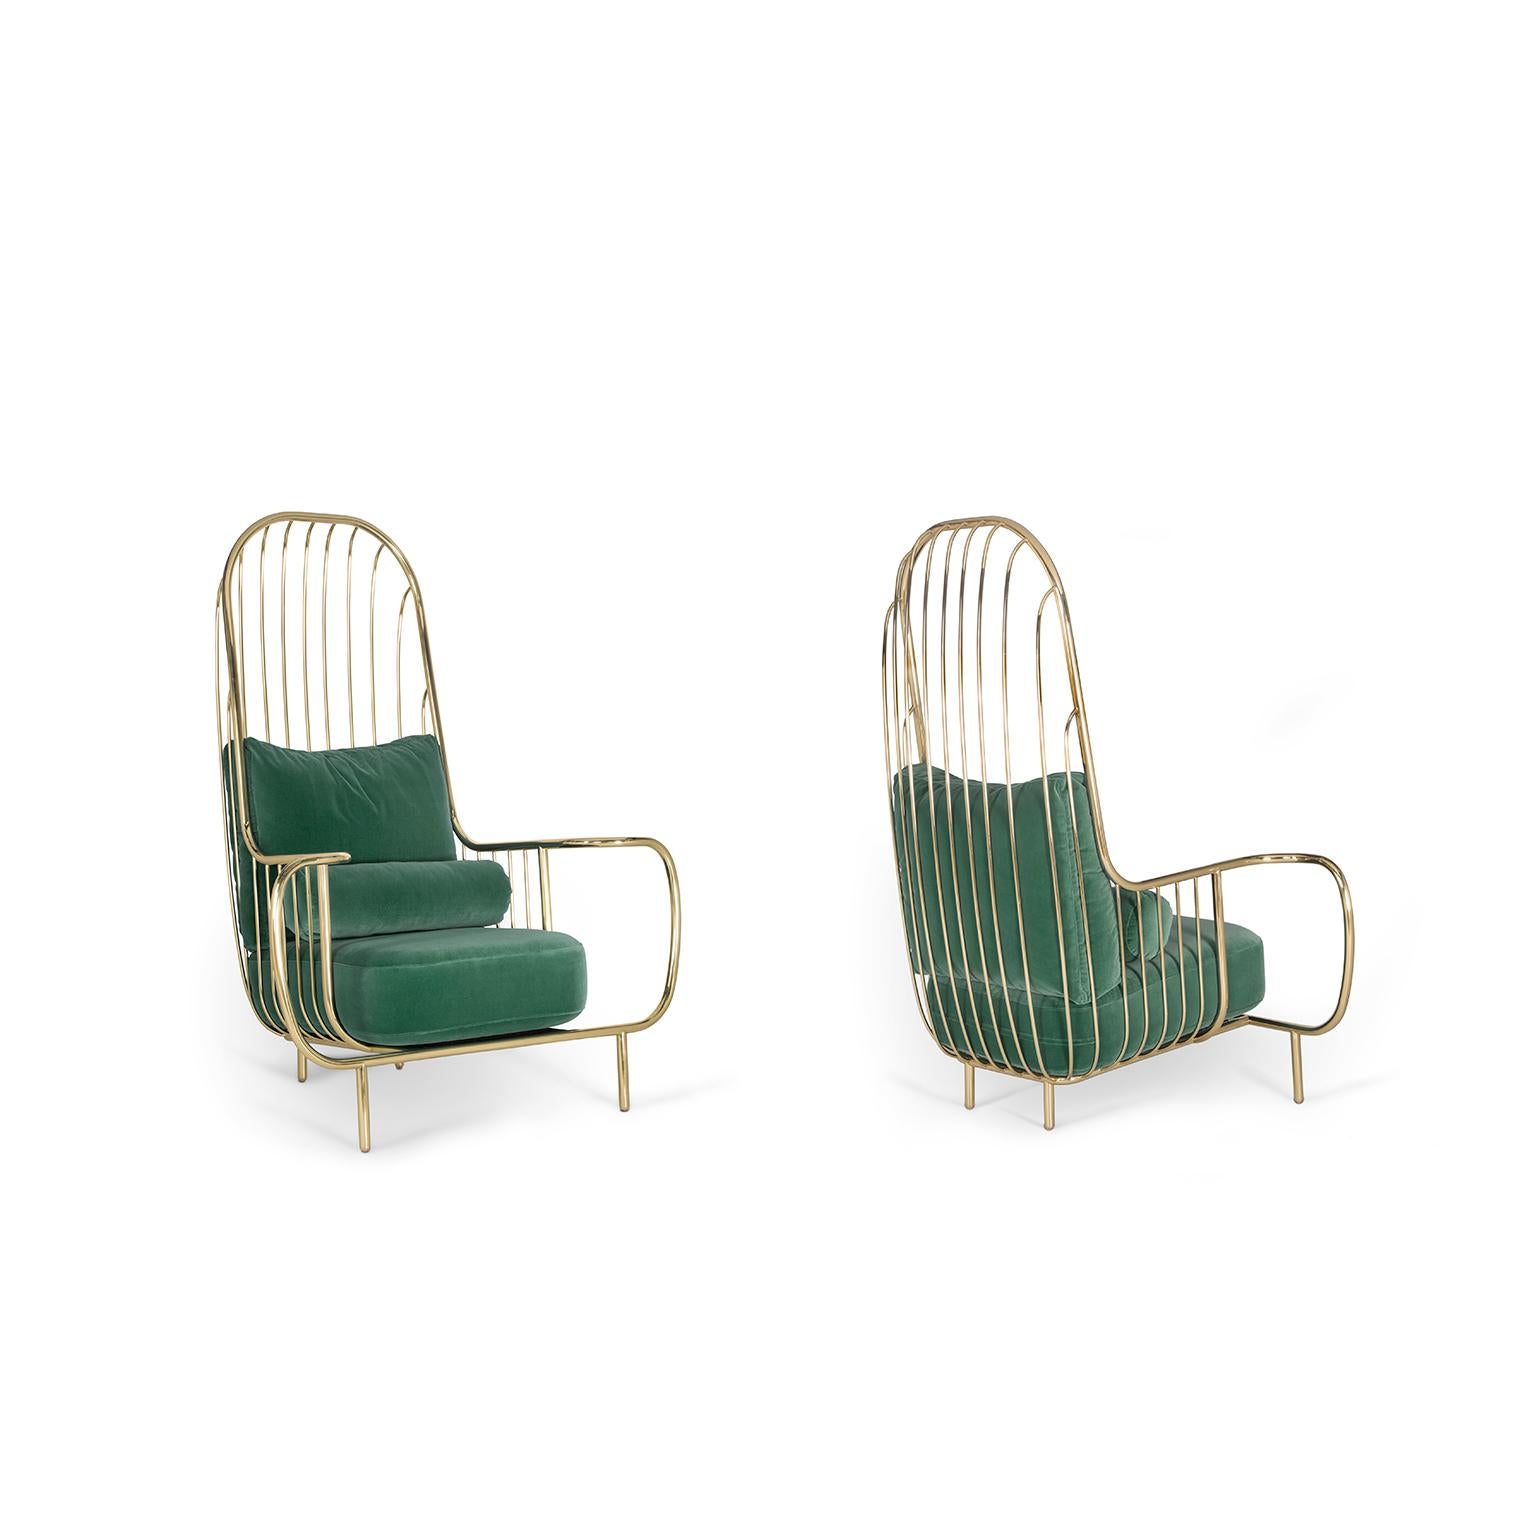 Portuguese Modern Liberty Armchair High Back in Polished Brass and Green Velvet Cushions For Sale